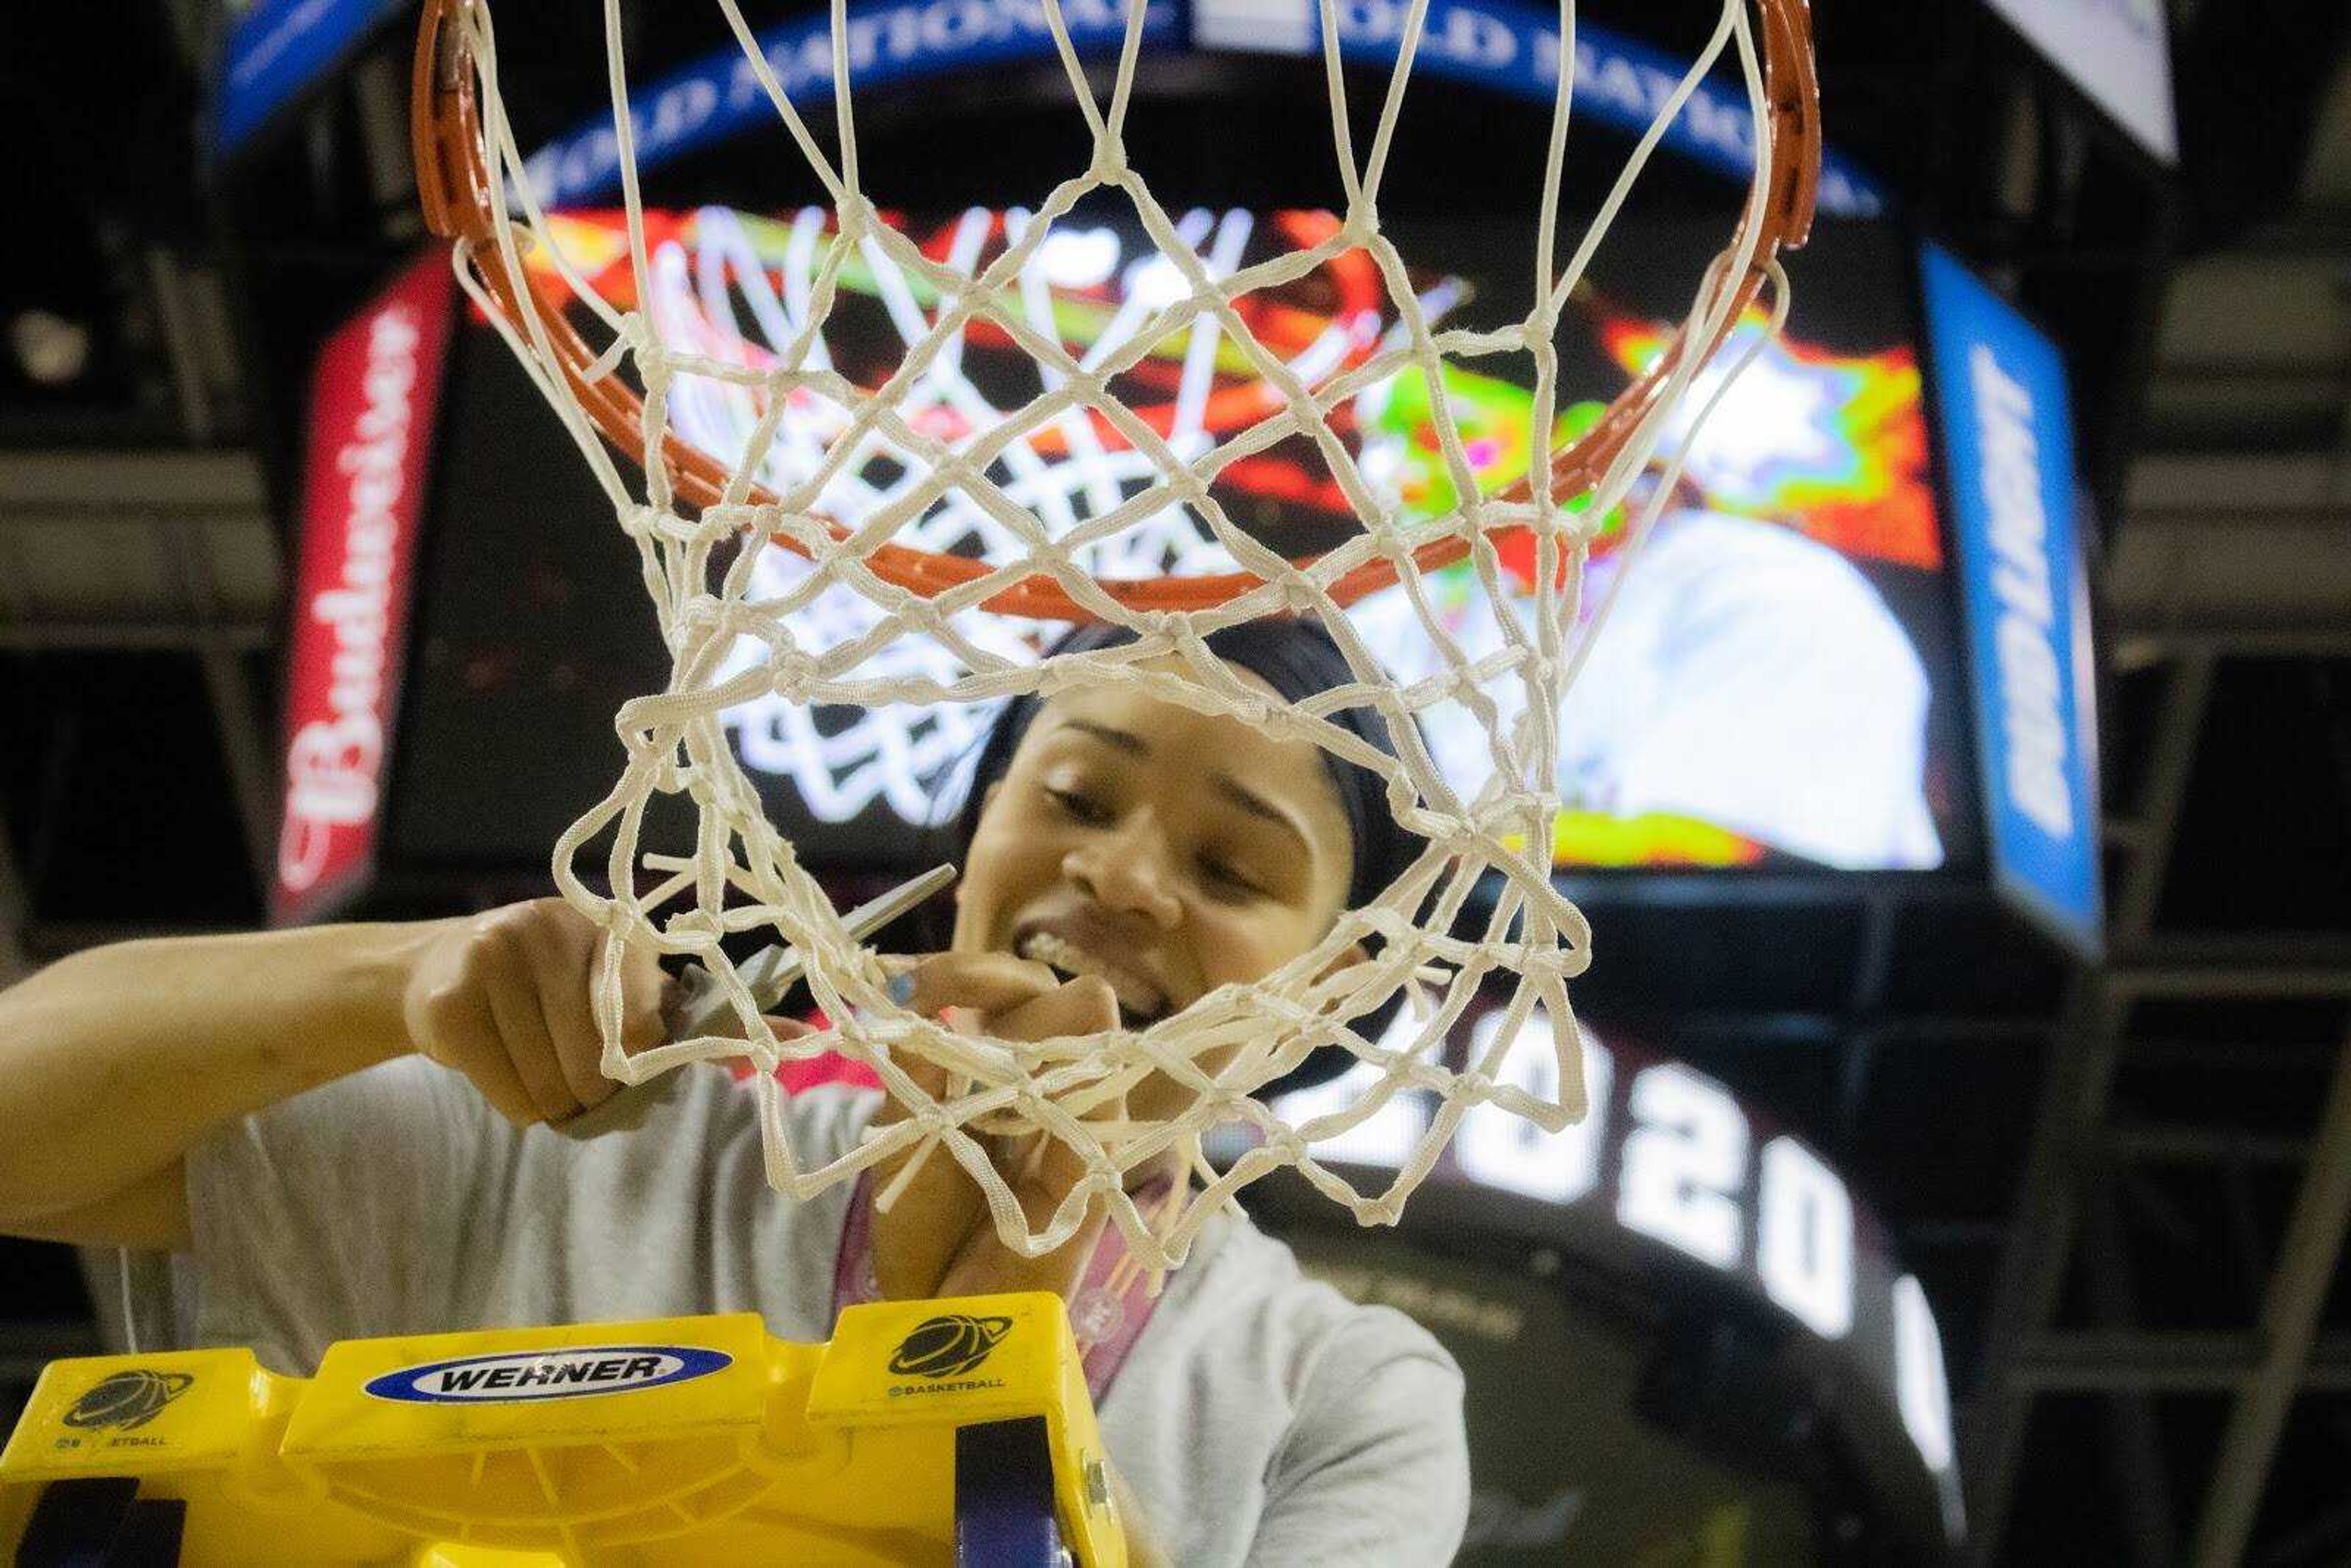 Senior guard Tesia Thompson cuts down the net after the Redhawks 67-47 win over the University of Tennessee Martin Skyhawks in the Ohio Valley Conference Tournament Championship on March 7 in Evansville, Indiana.